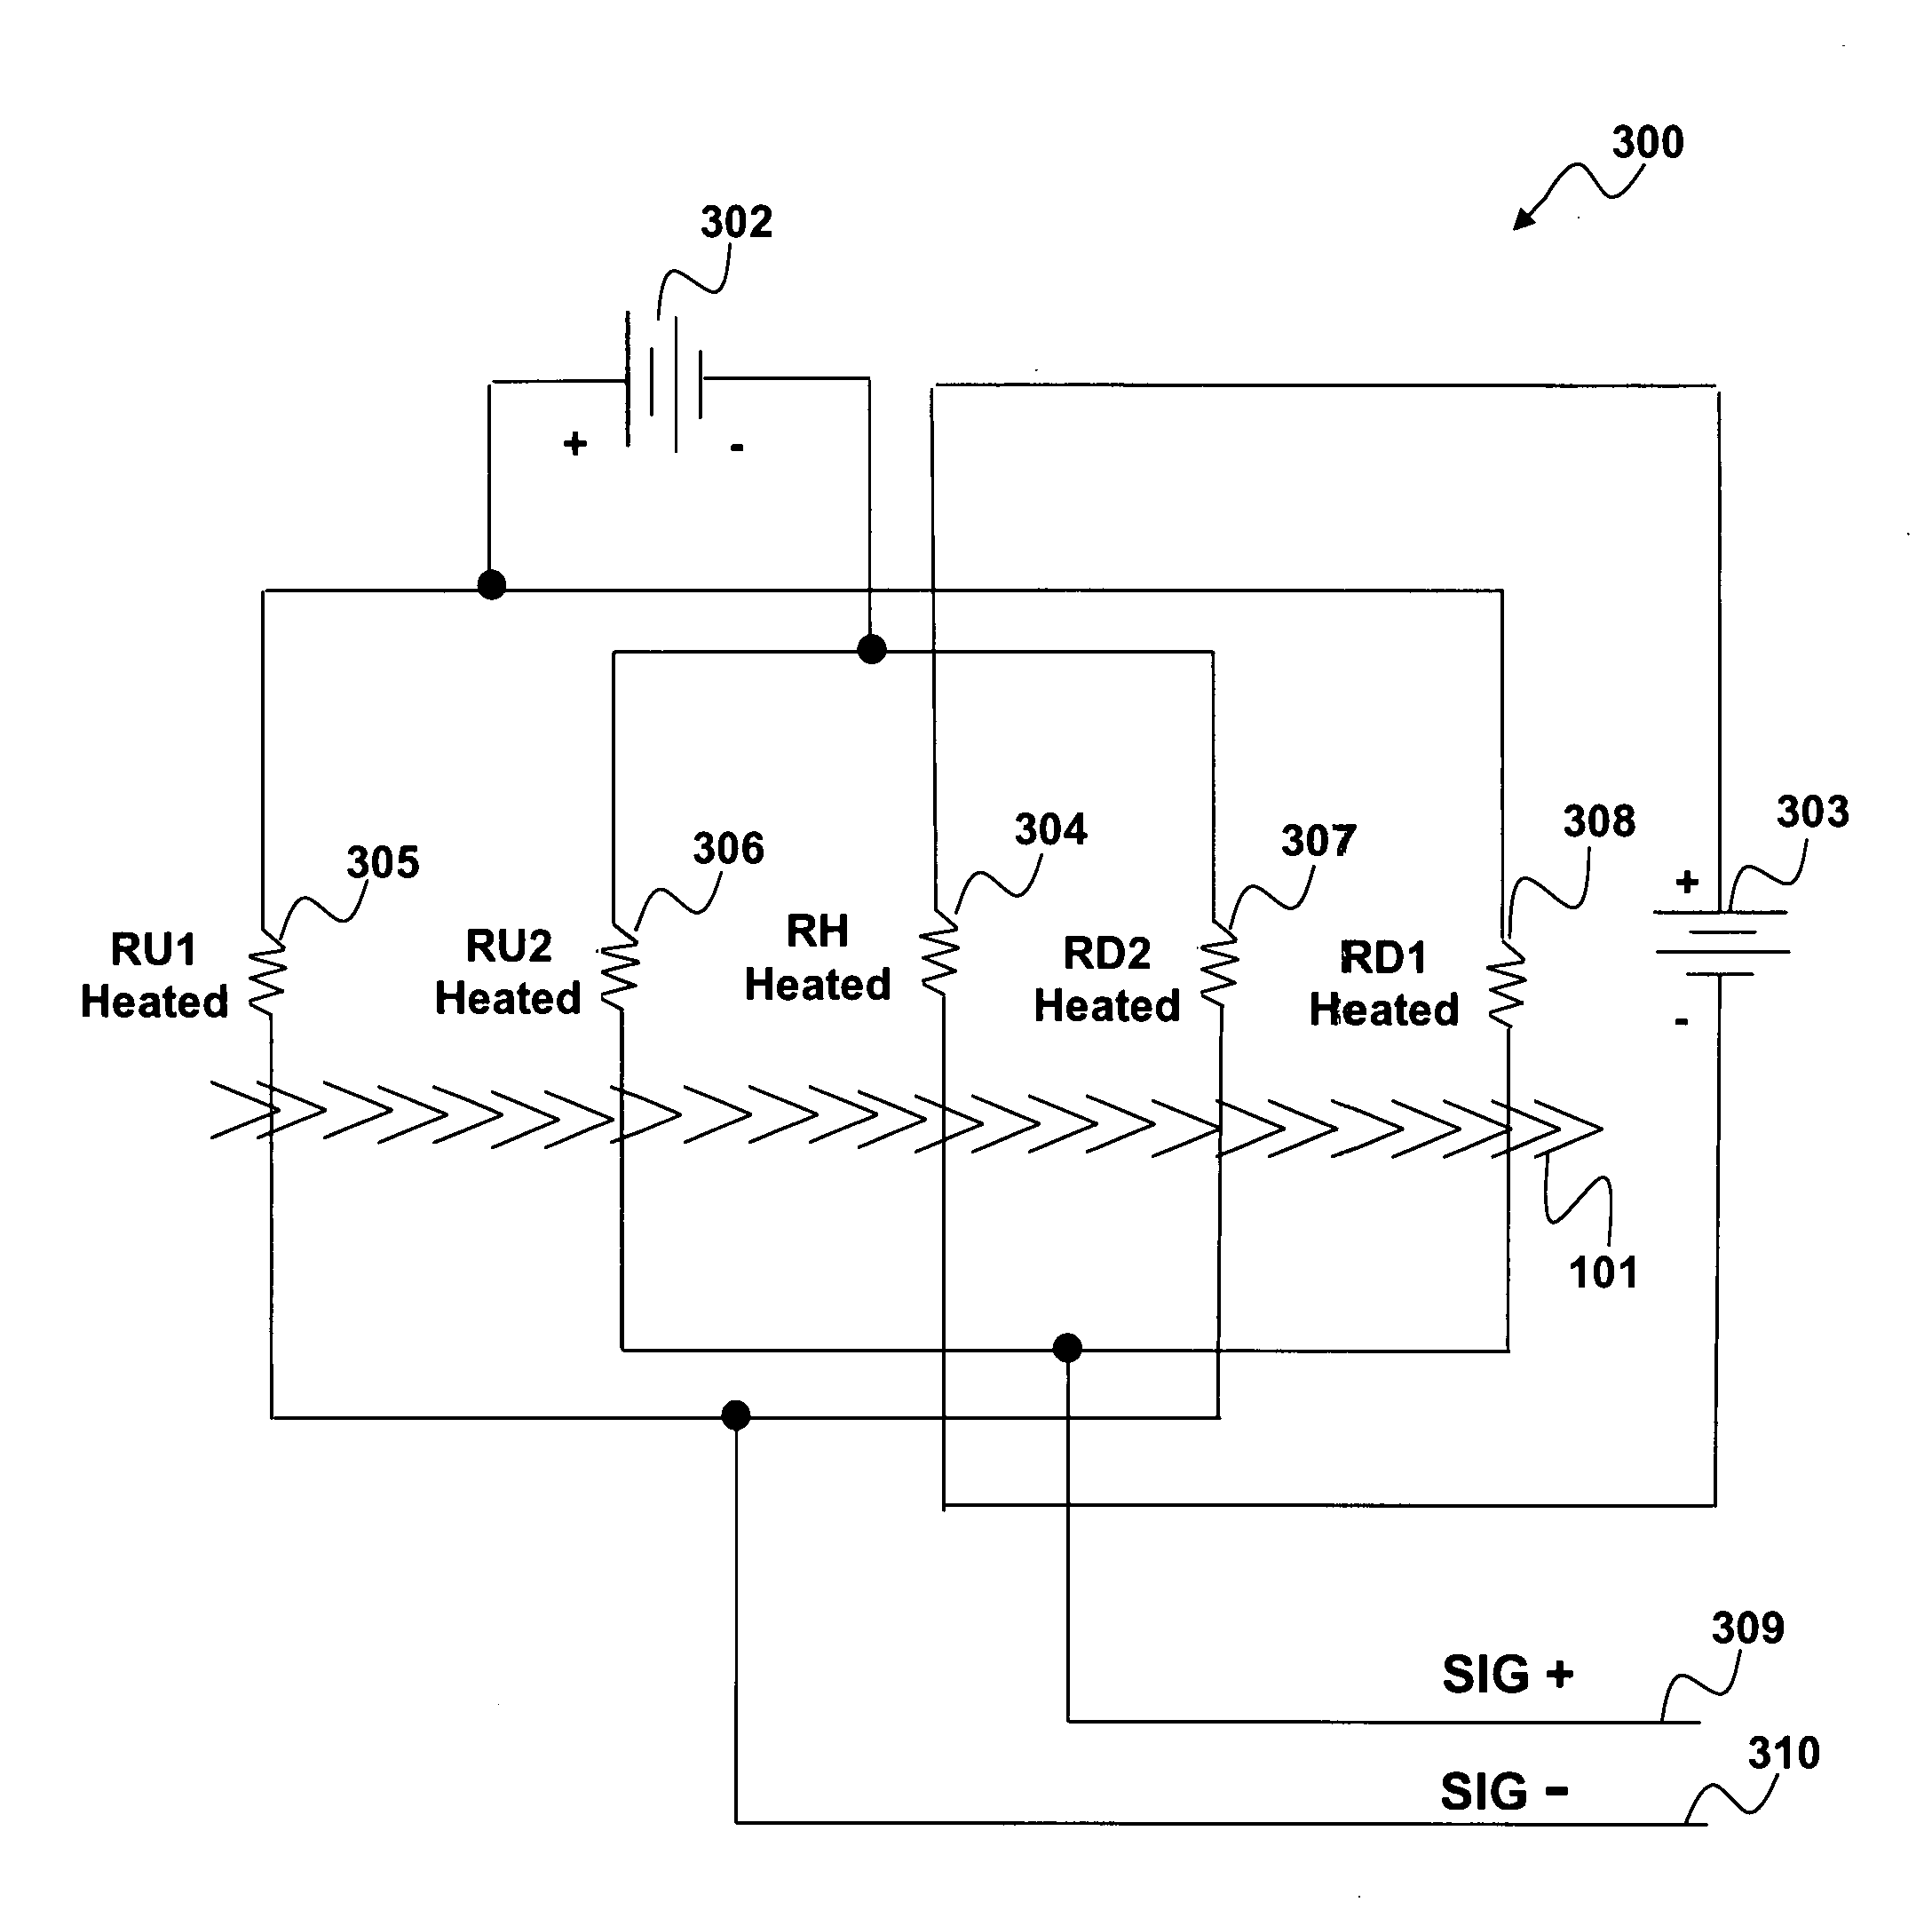 Mass airflow sensing system including resistive temperature sensors and a heating element